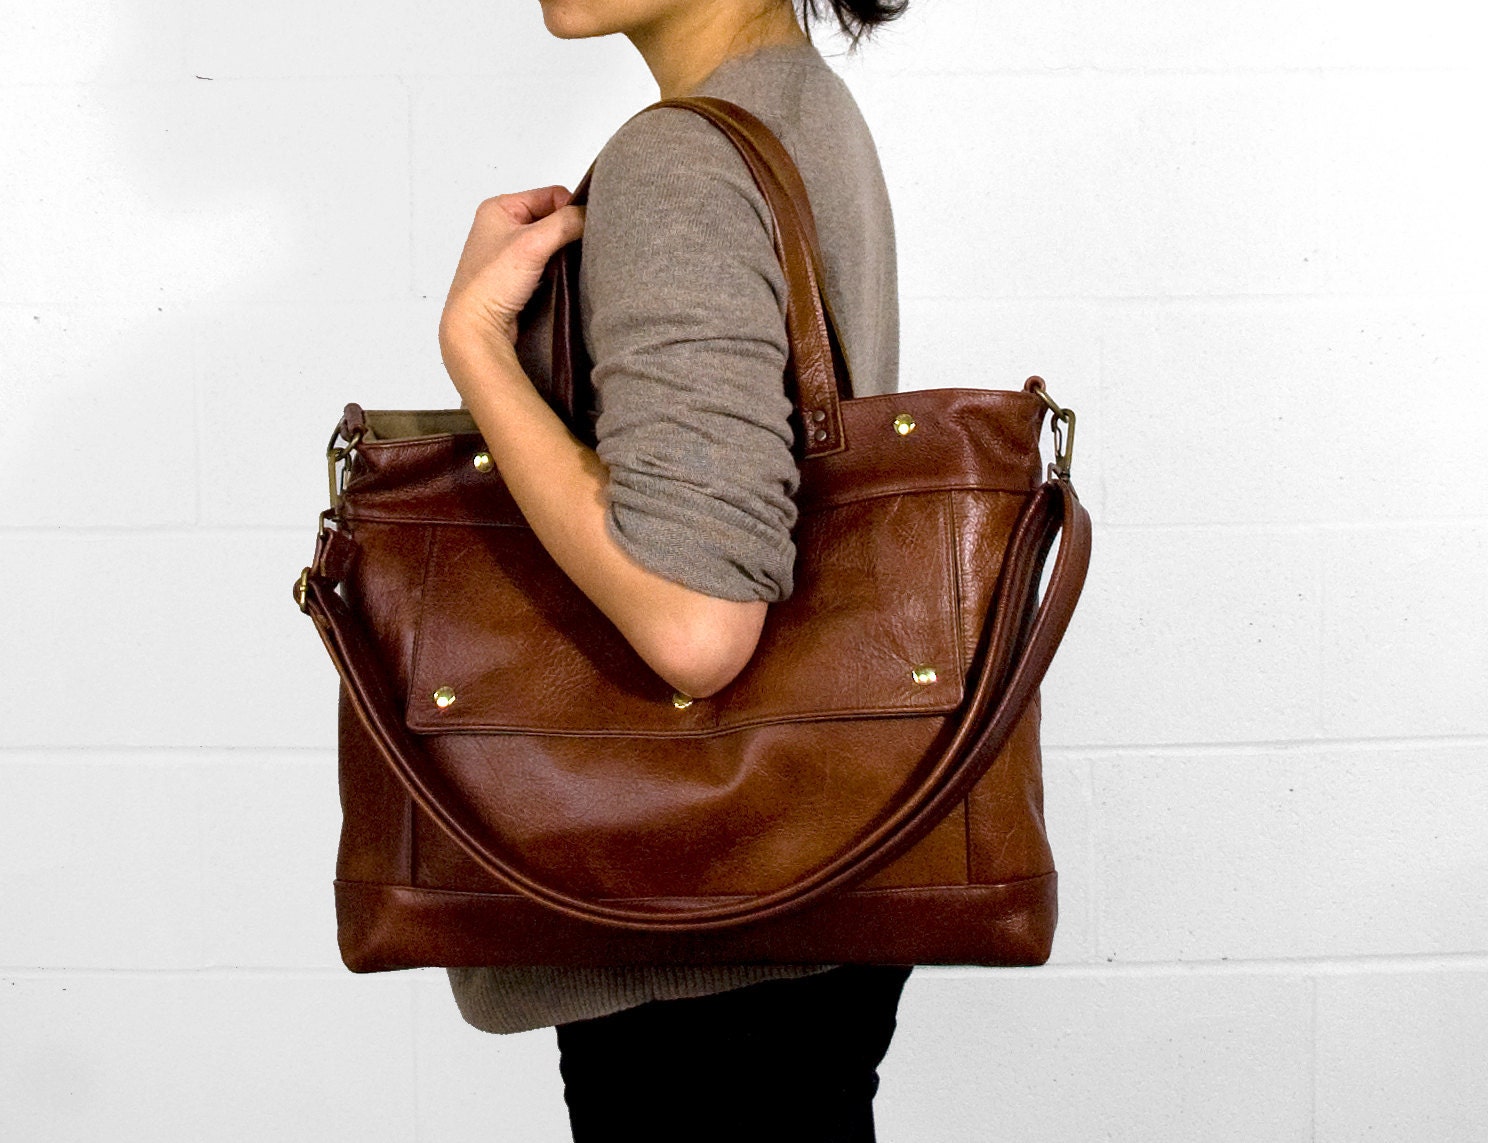 Archive Bag in Chestnut Brown - Ready to Ship